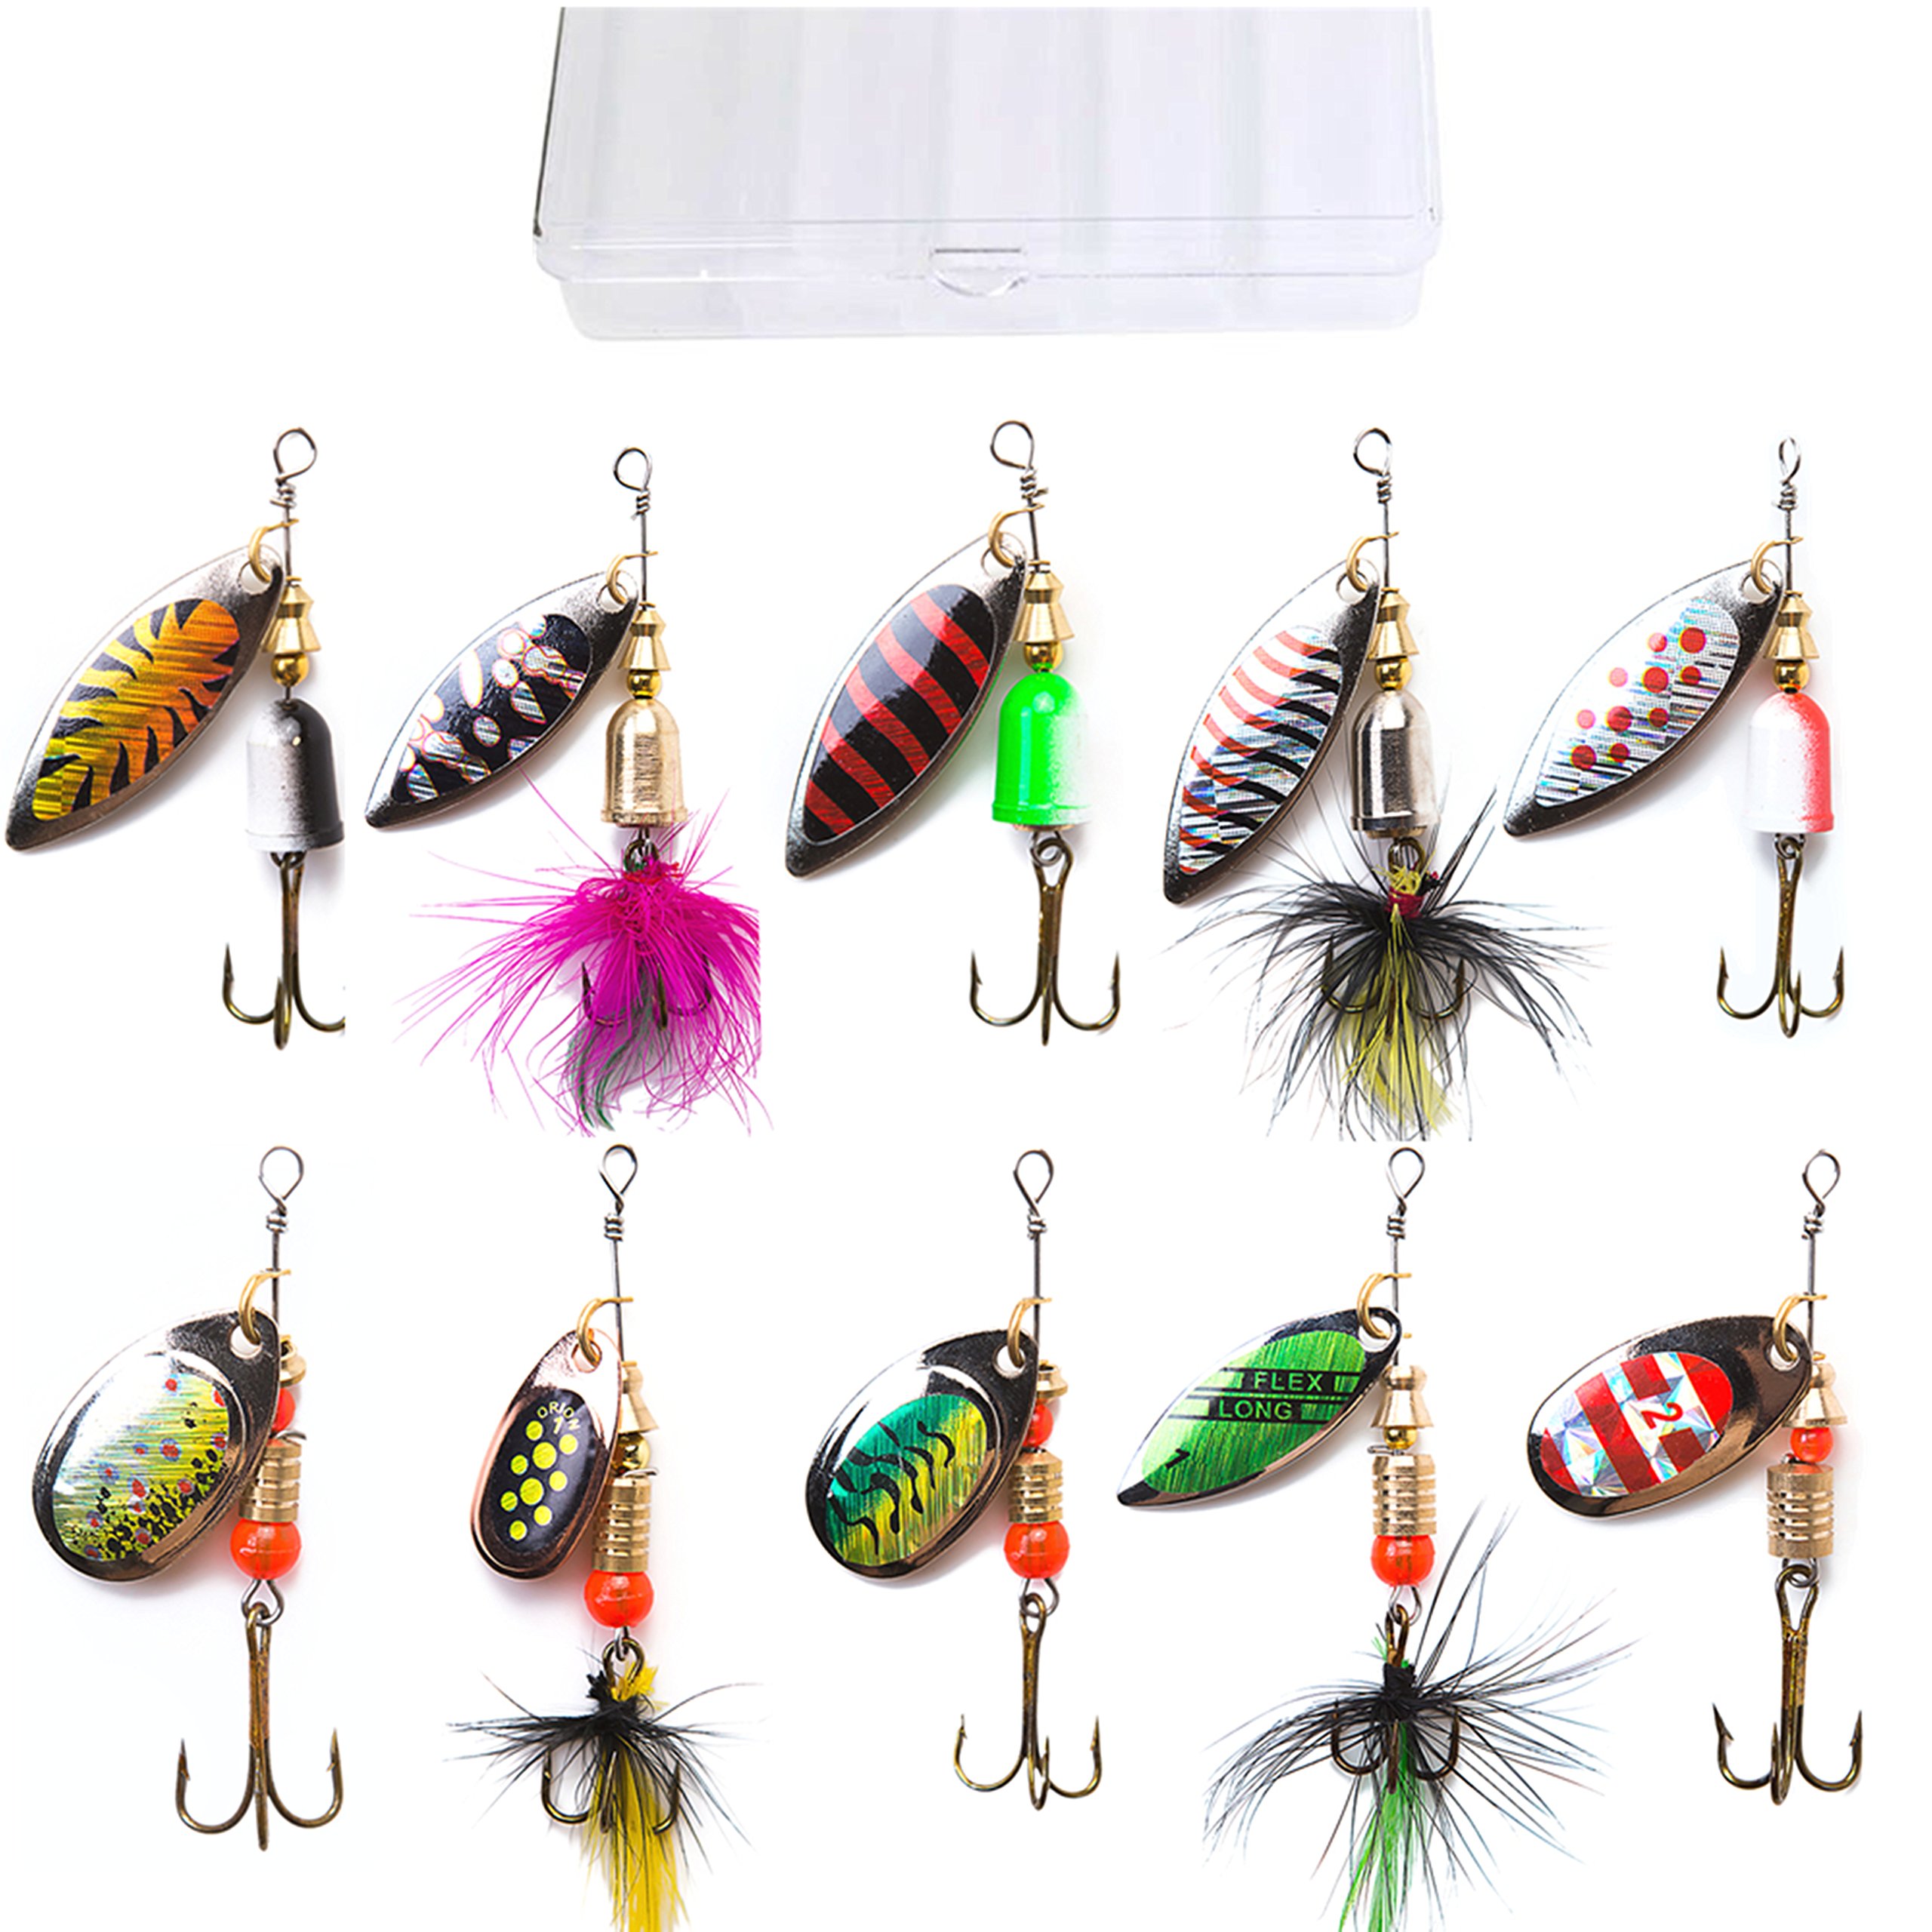 FUCHU Fishing Lure Spinnerbait 16pcs Fishing Spoons Lures Metal Baits Set  for Trout Bass Casting Spinner Fishing Bait with Storage Bag Case